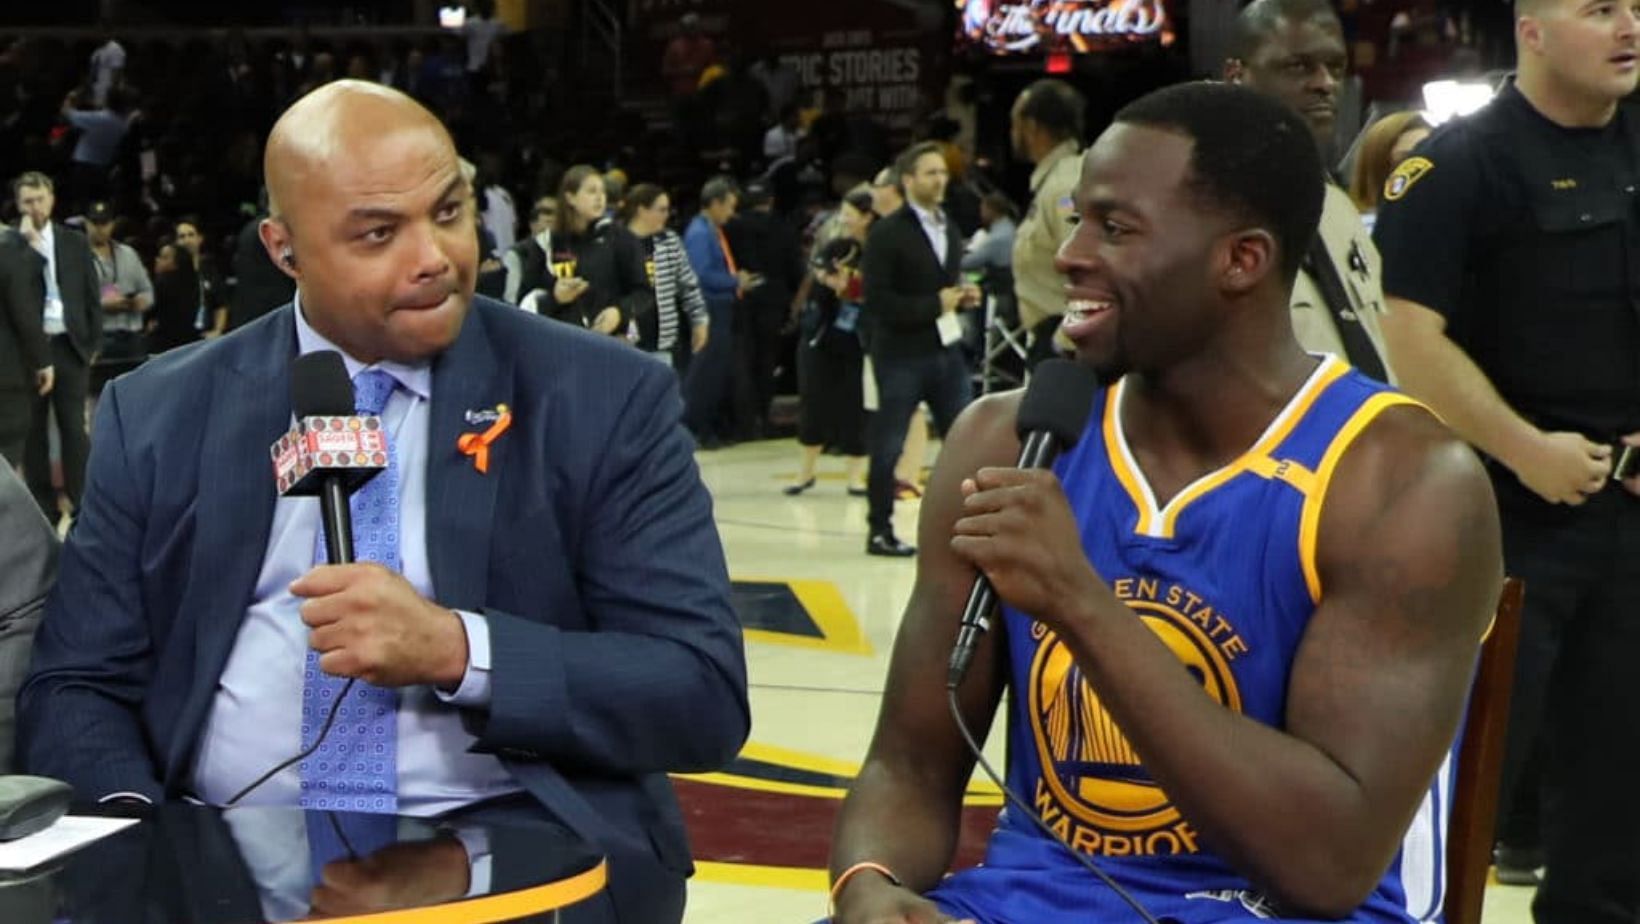 Charles Barkley trolled Draymond Green about being jobless as the NBA superstar remains a free agent.